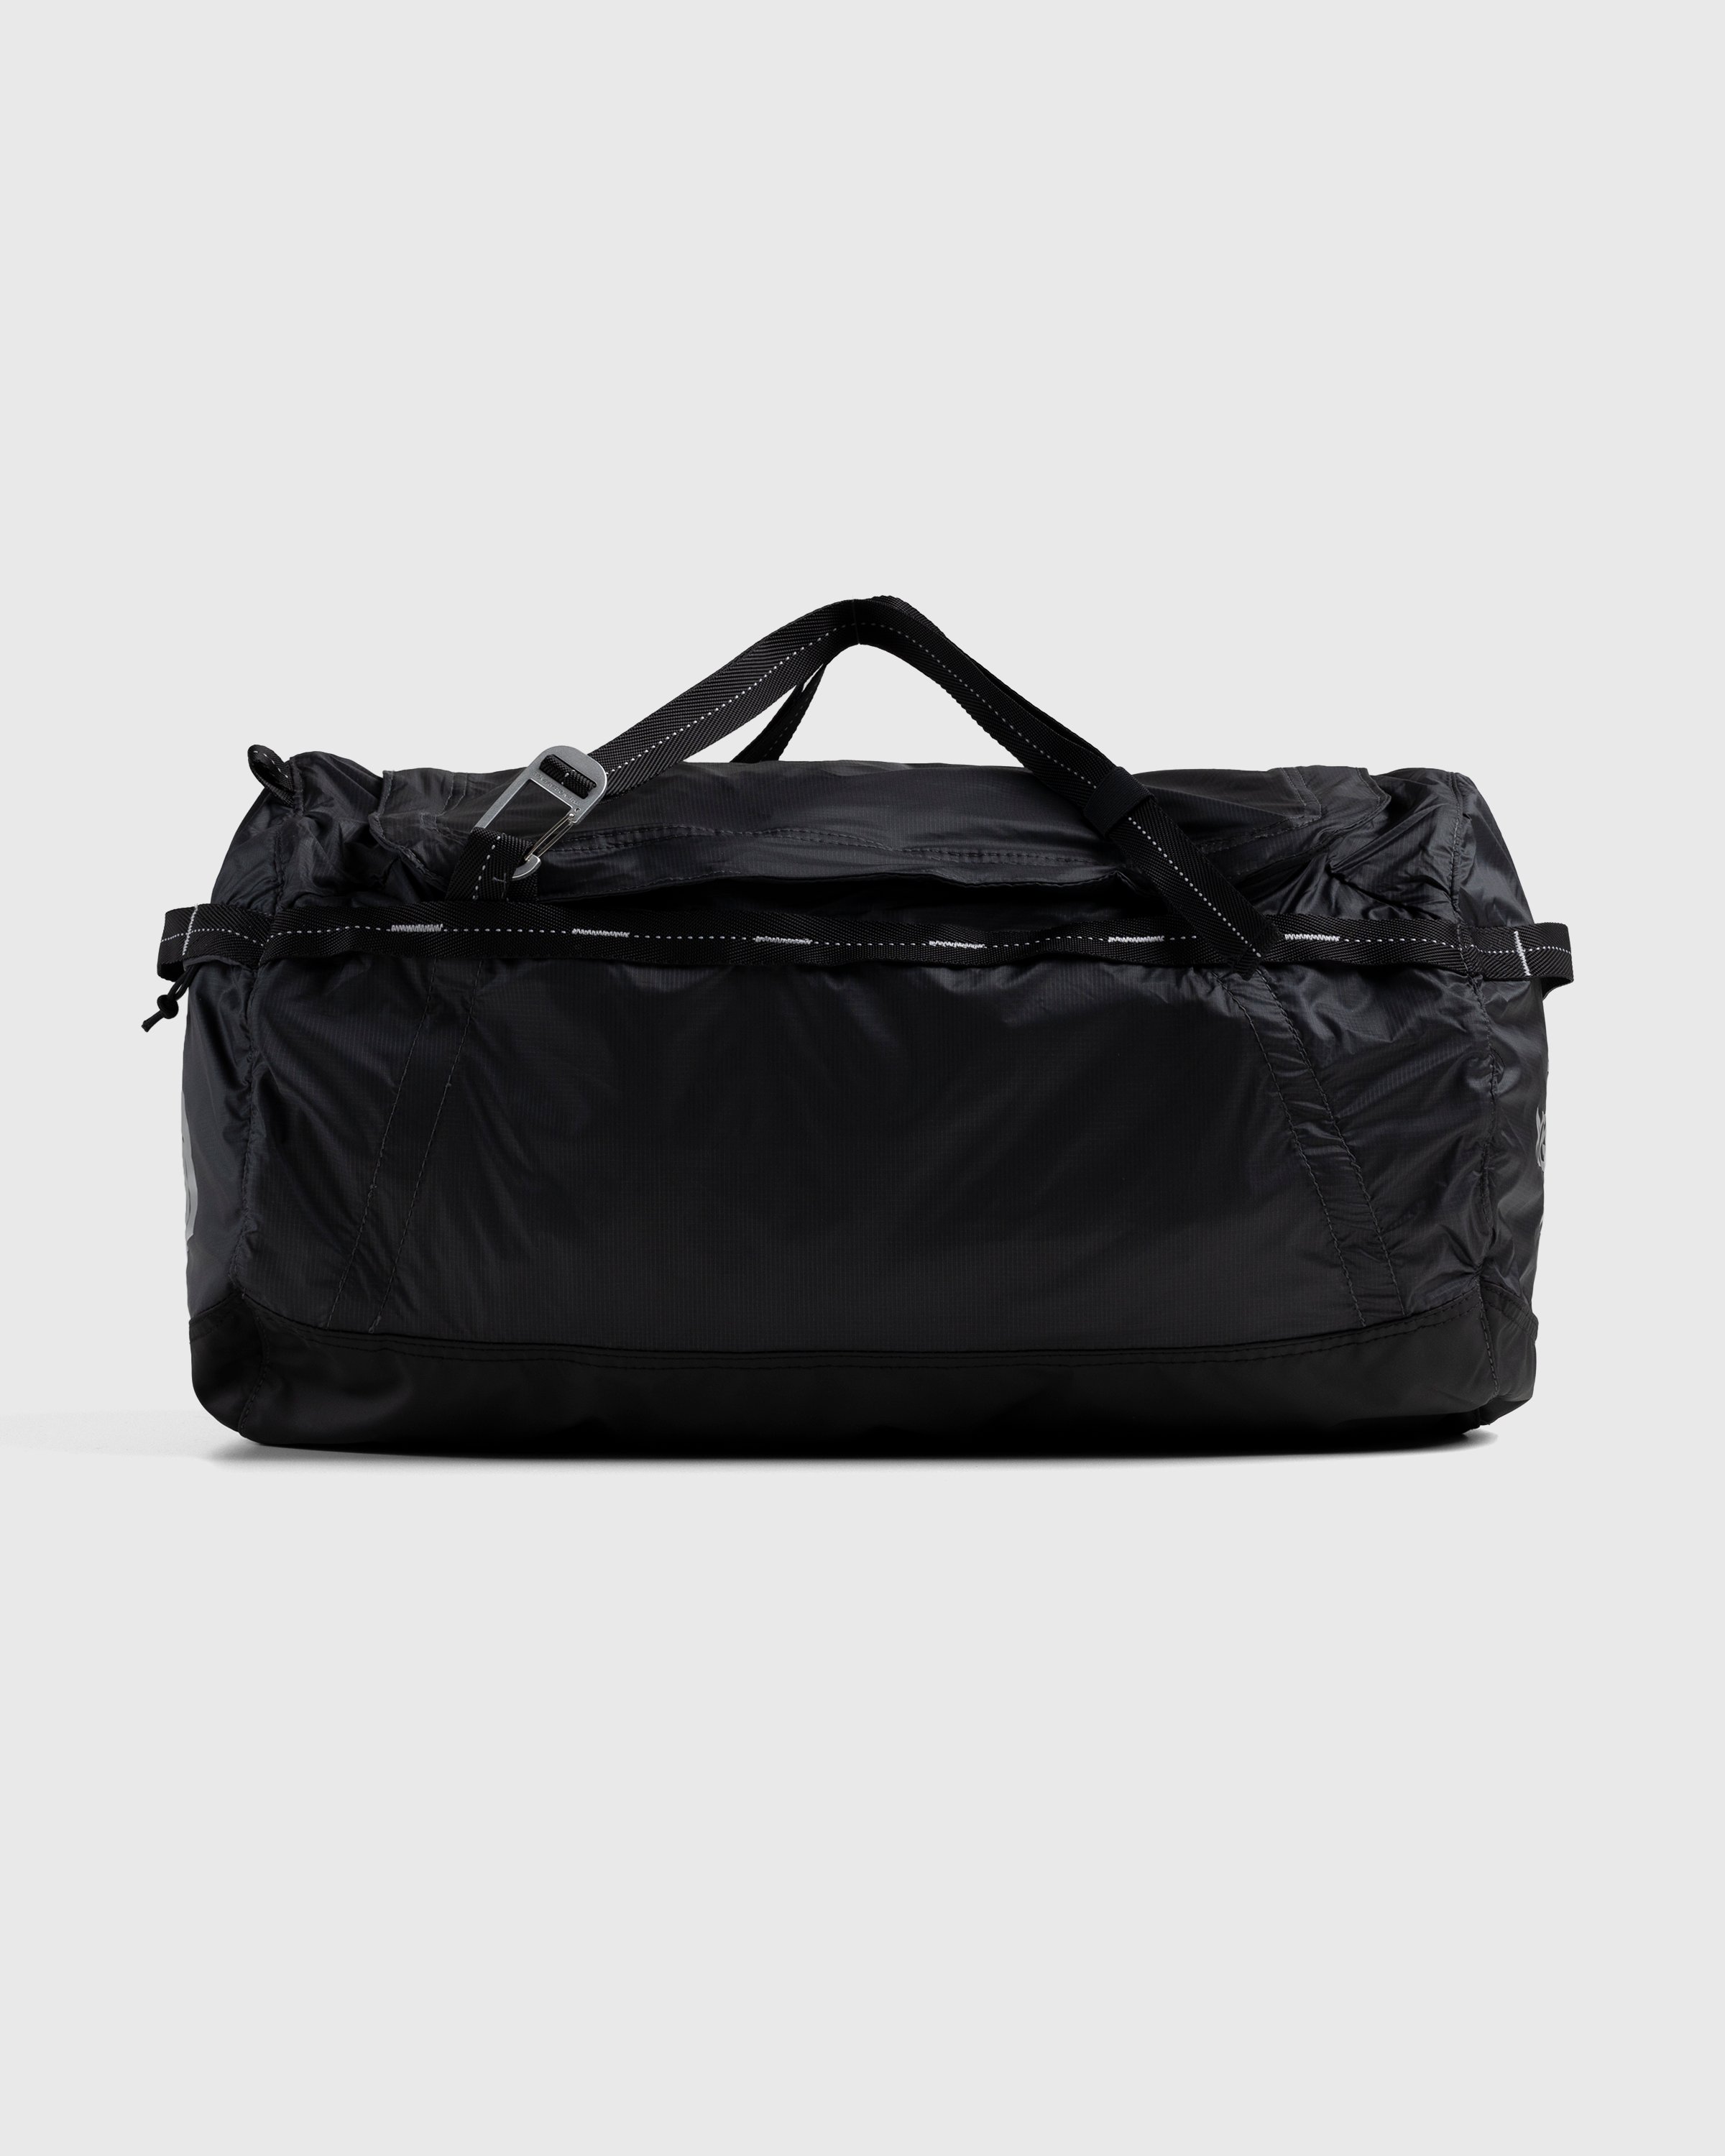 The North Face - Flyweight Duffel Grey/Black - Accessories - Grey - Image 3